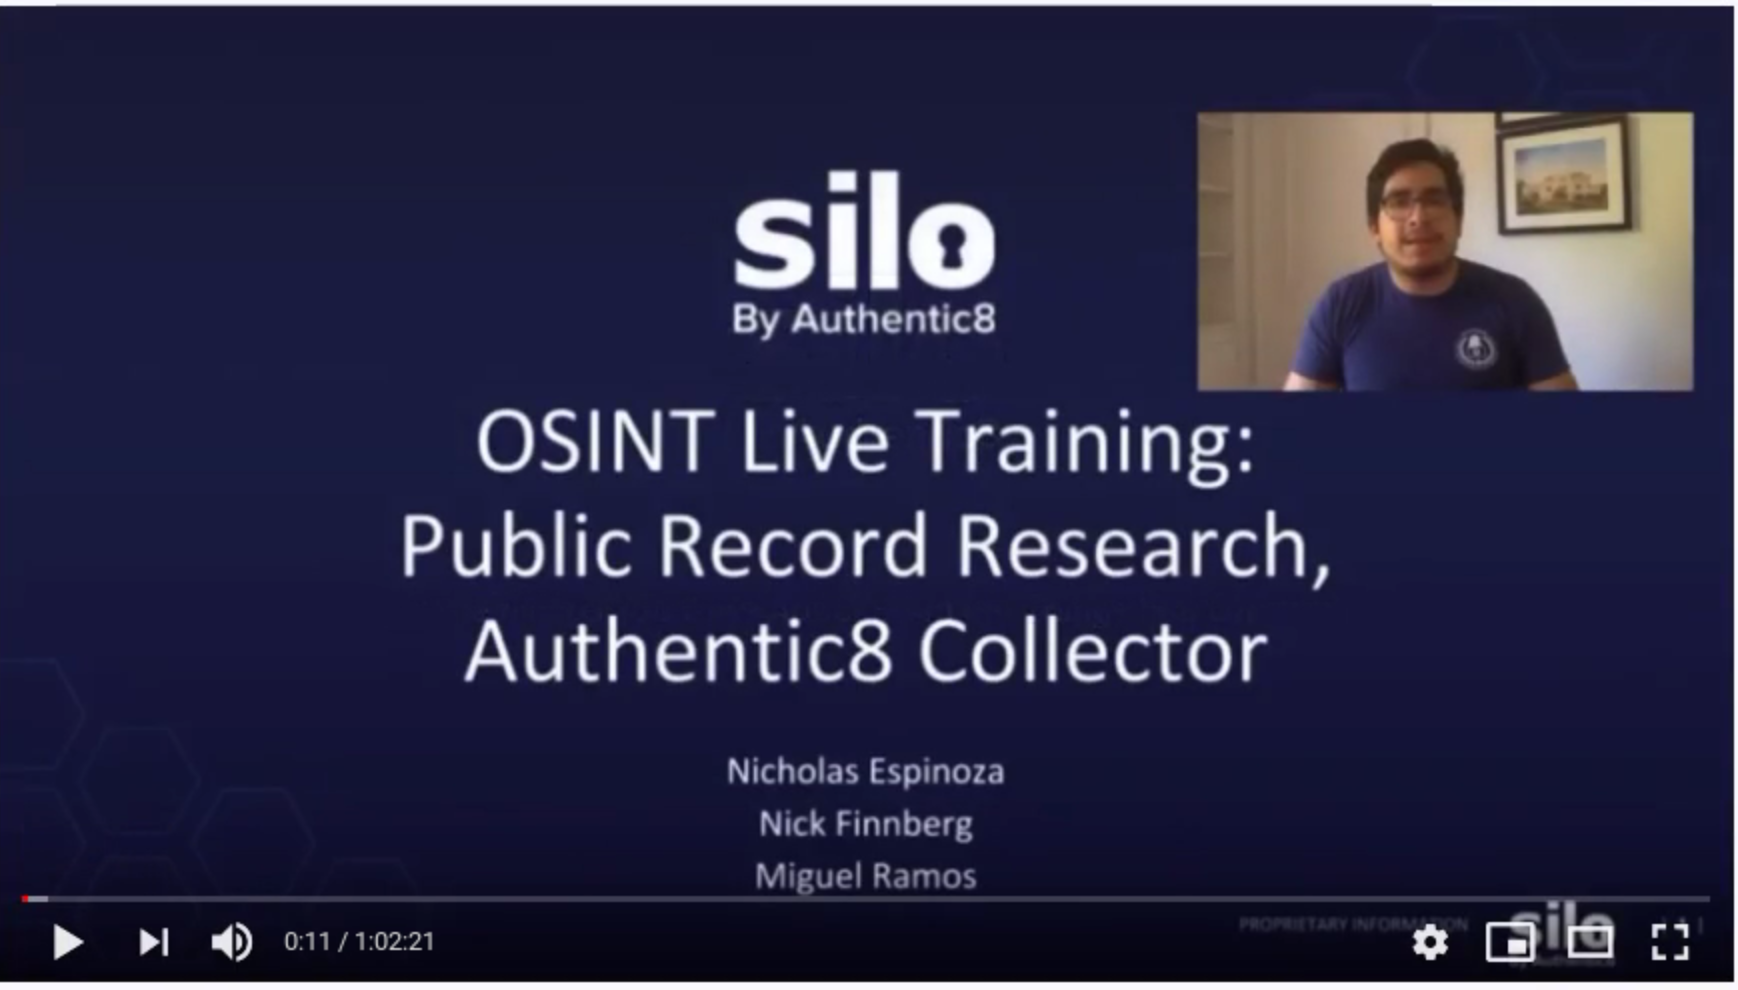 OSINT for public records research video opening screen